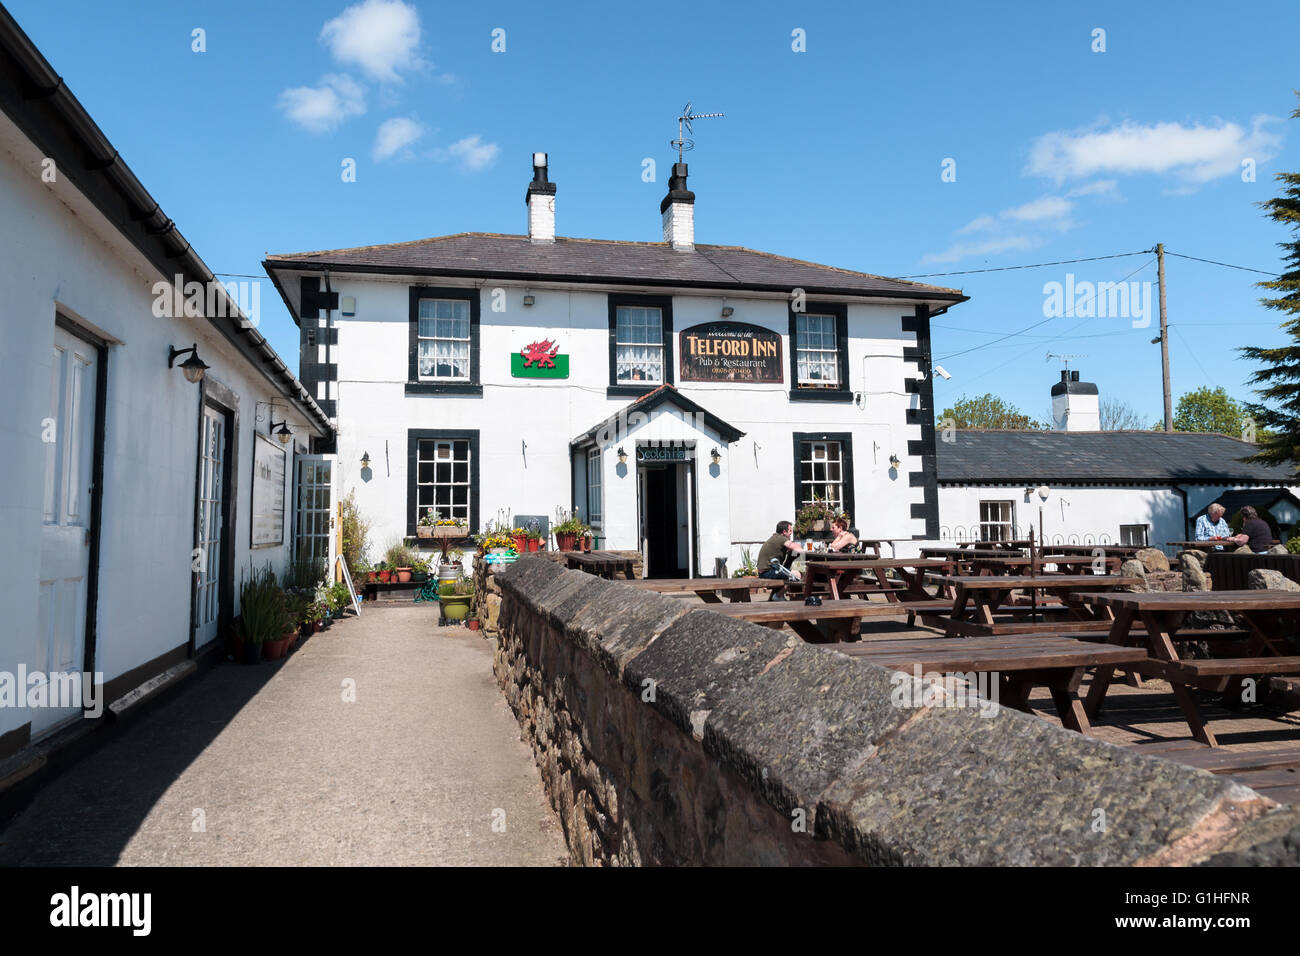 The Telford Inn built in the 18th century as a house for the supervisor of the construction of Pontcysyllte aqueduct Stock Photo